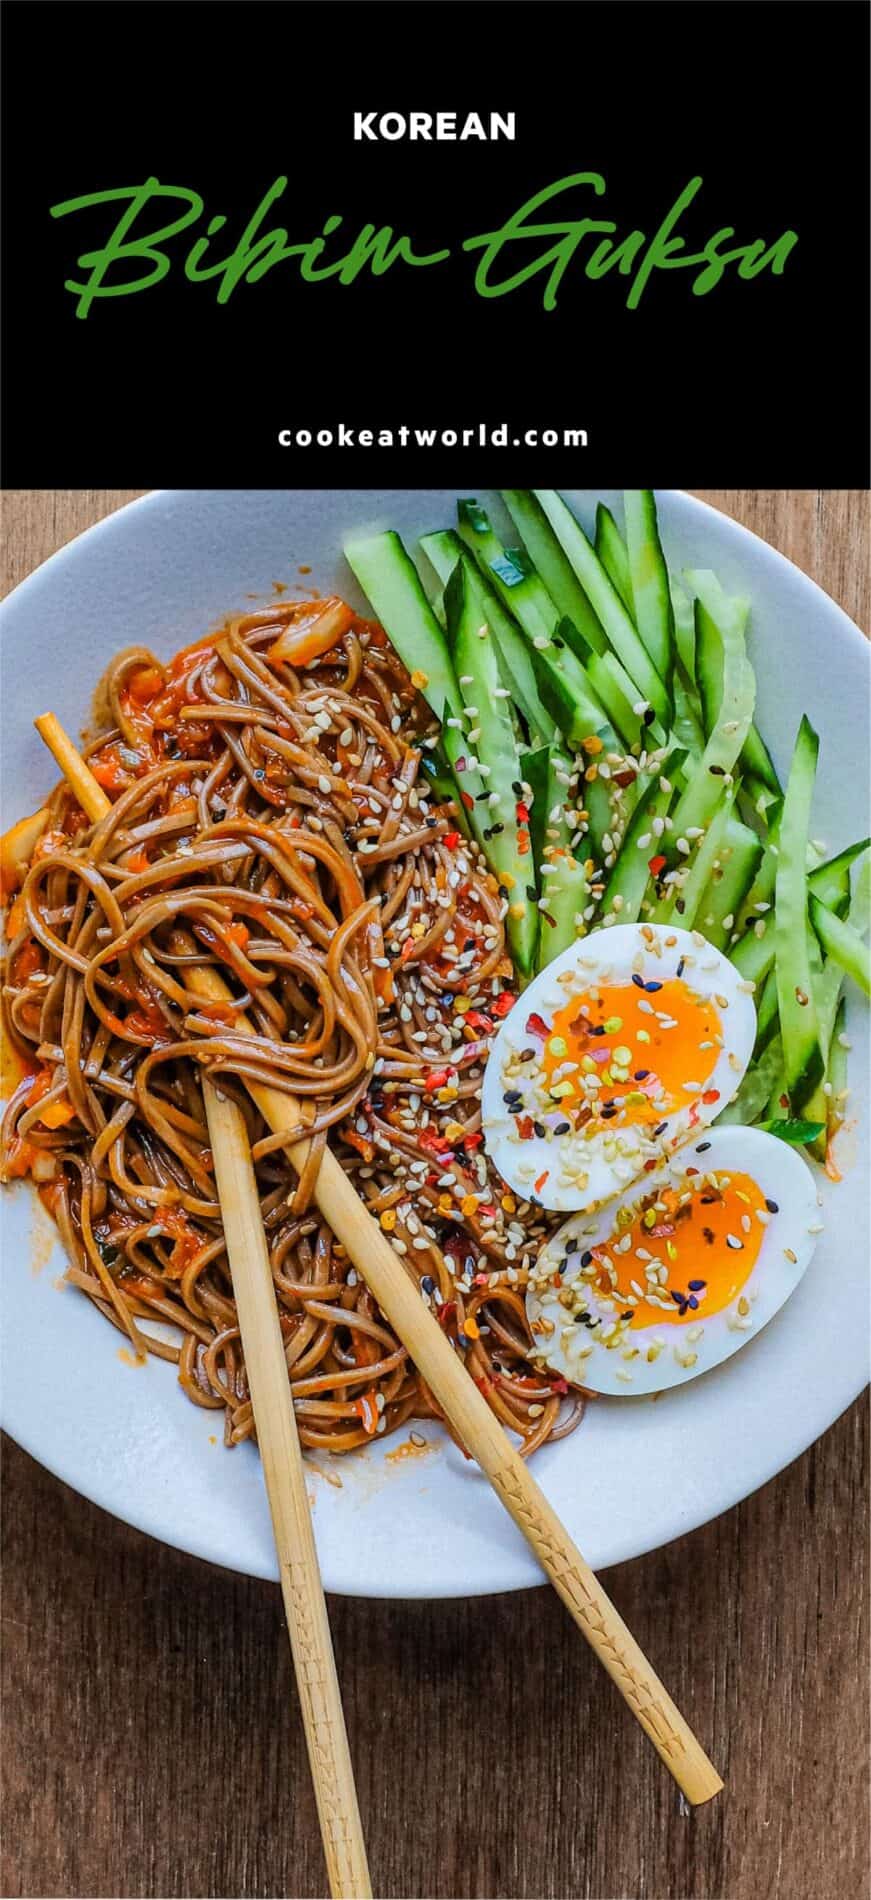 A bowl of Asian noodles called Bibim Guksu. Garnished with eggs and cucumber. Chopsticks are wrapped in the noodles.